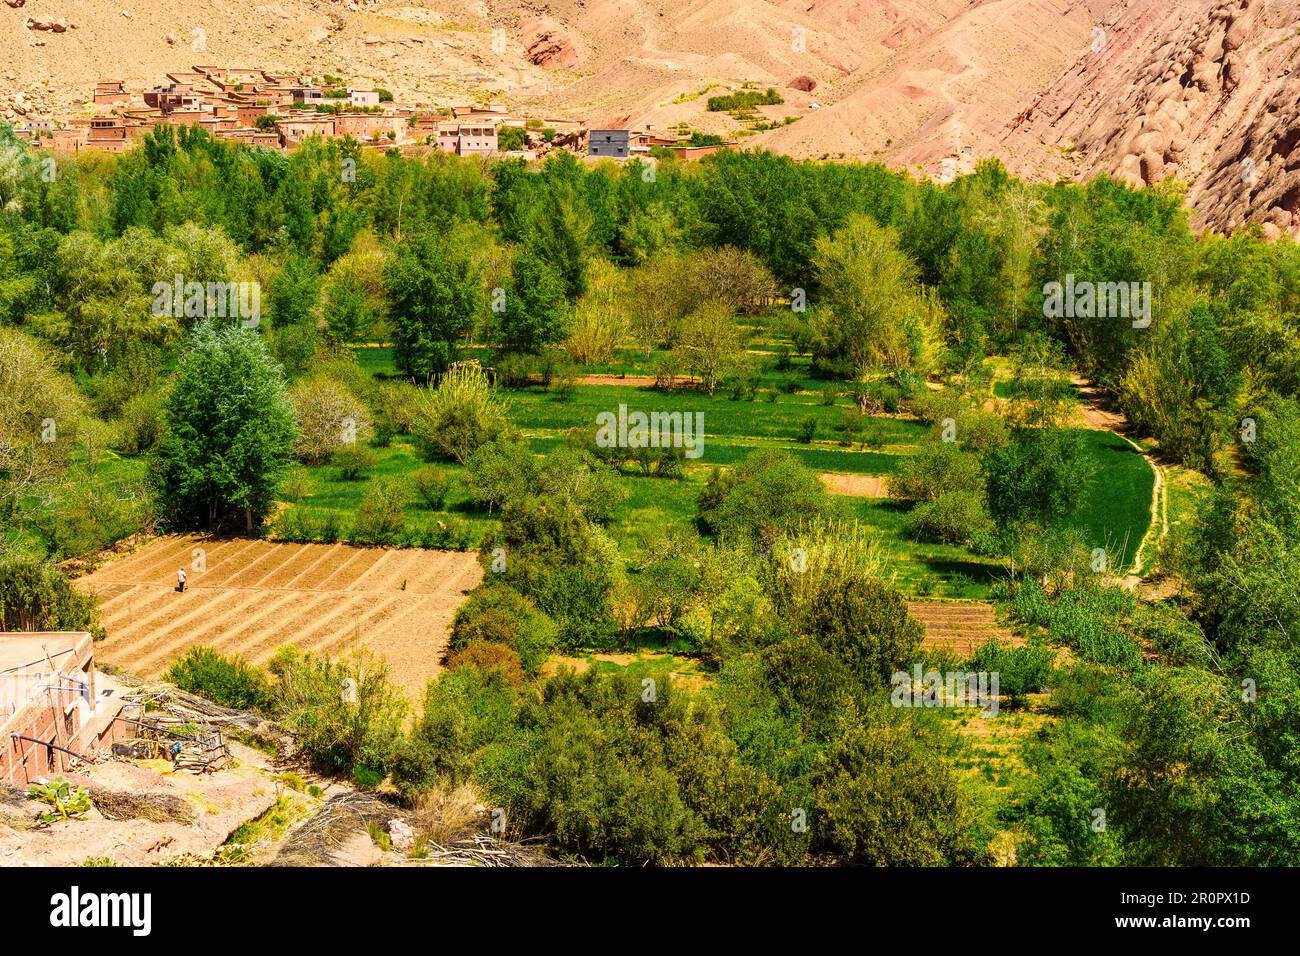 View of agricultural field in the Dades Gorge, the High Atlas Mountains, Central Morocco Stock Photo